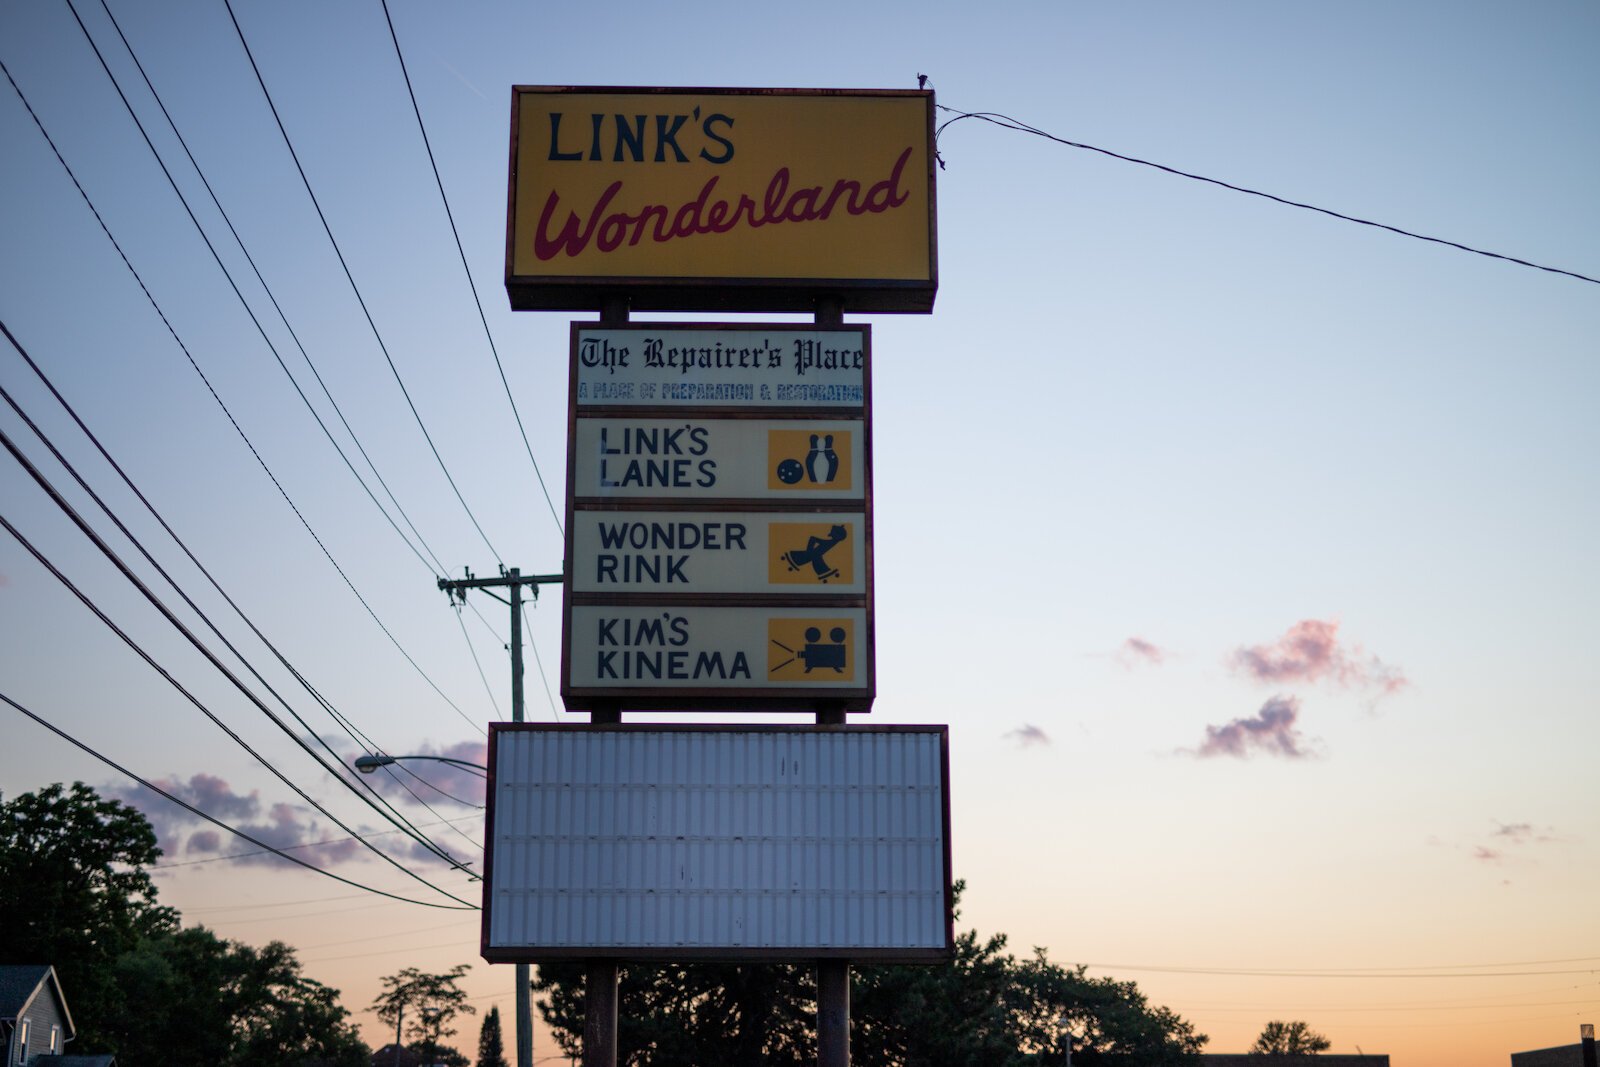 Link's Wonderland was a community staple in South East at 1711 Creighton Ave.